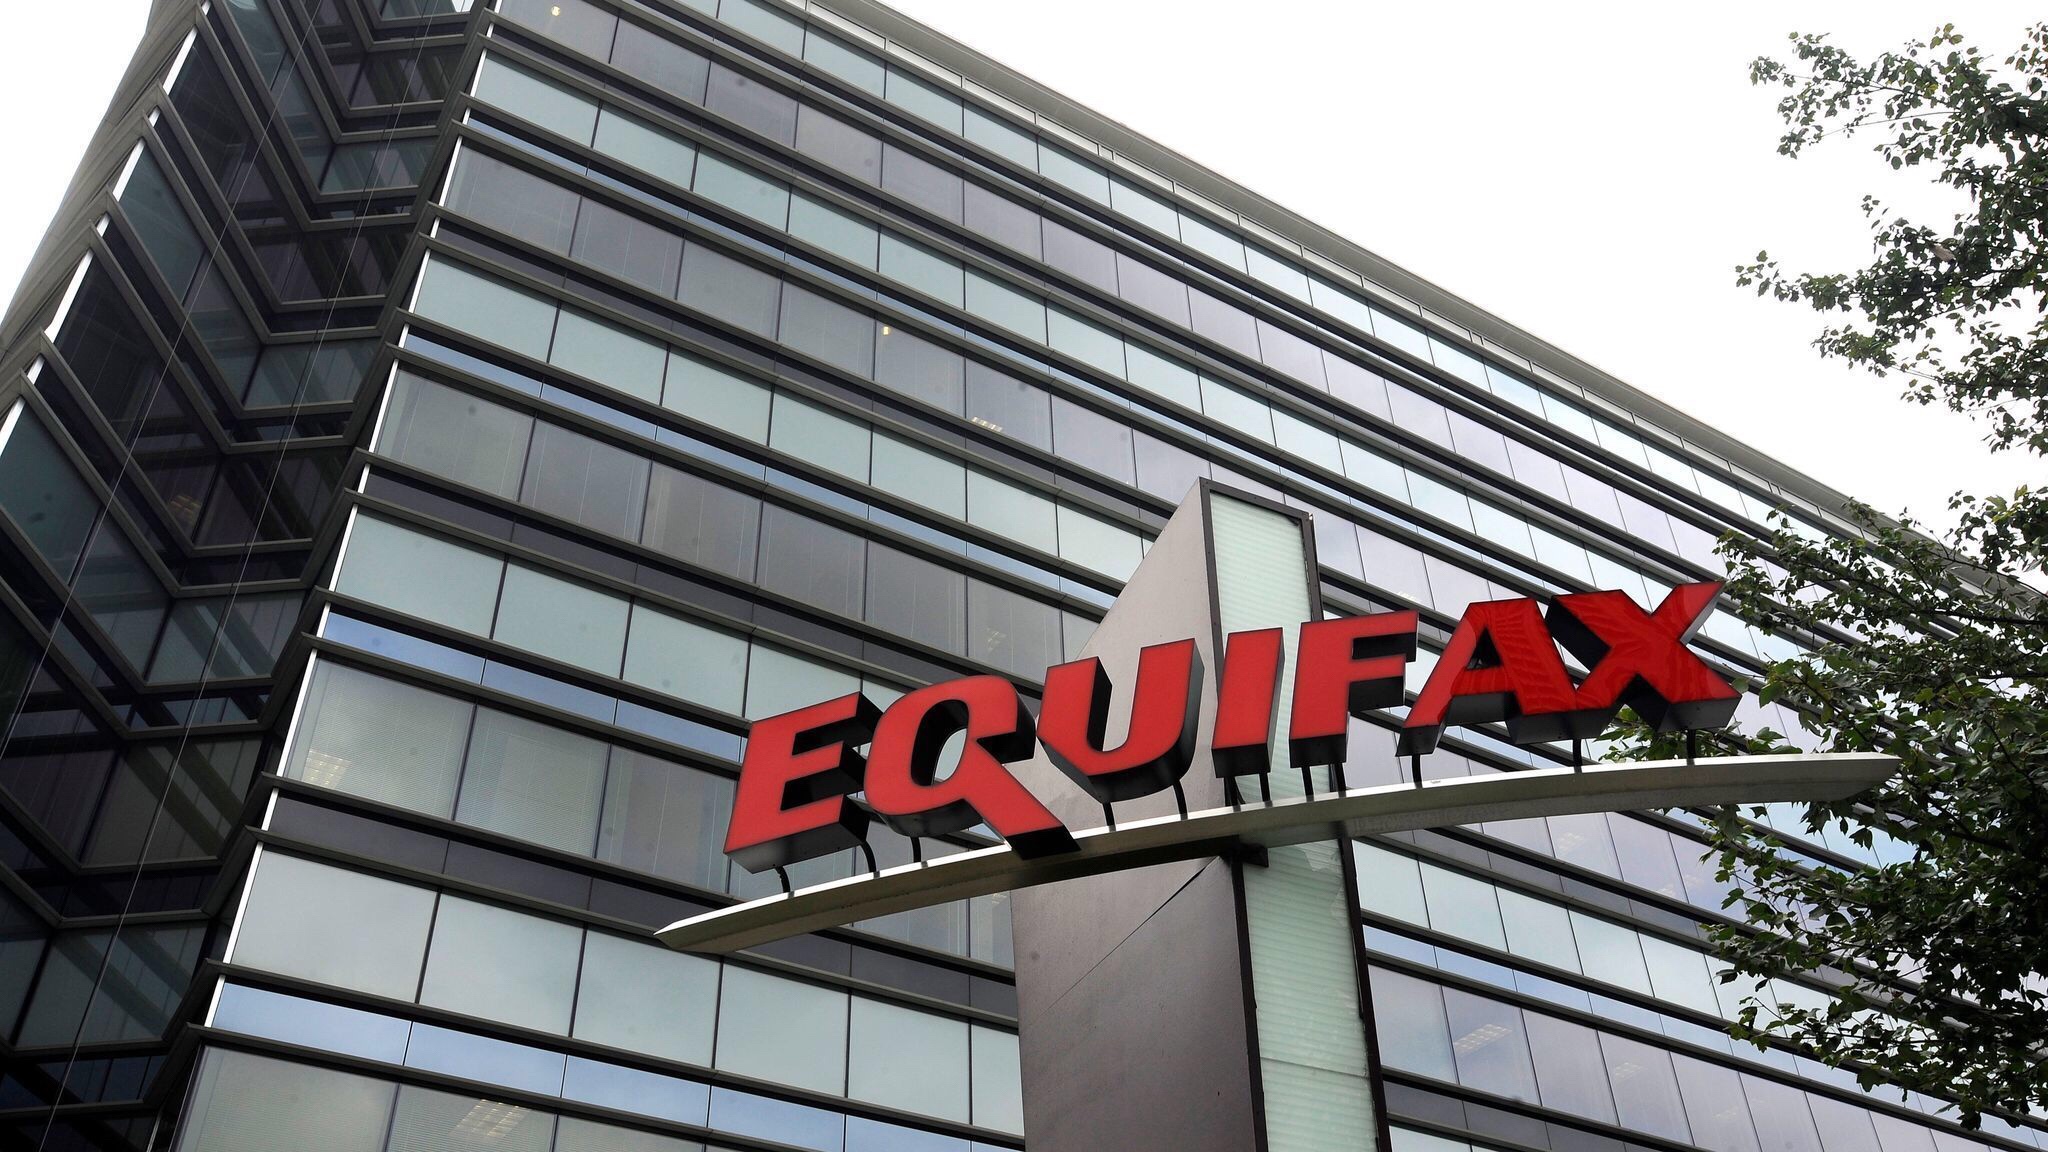 Hackers apparently accessed more personal data from Equifax than what was previously known